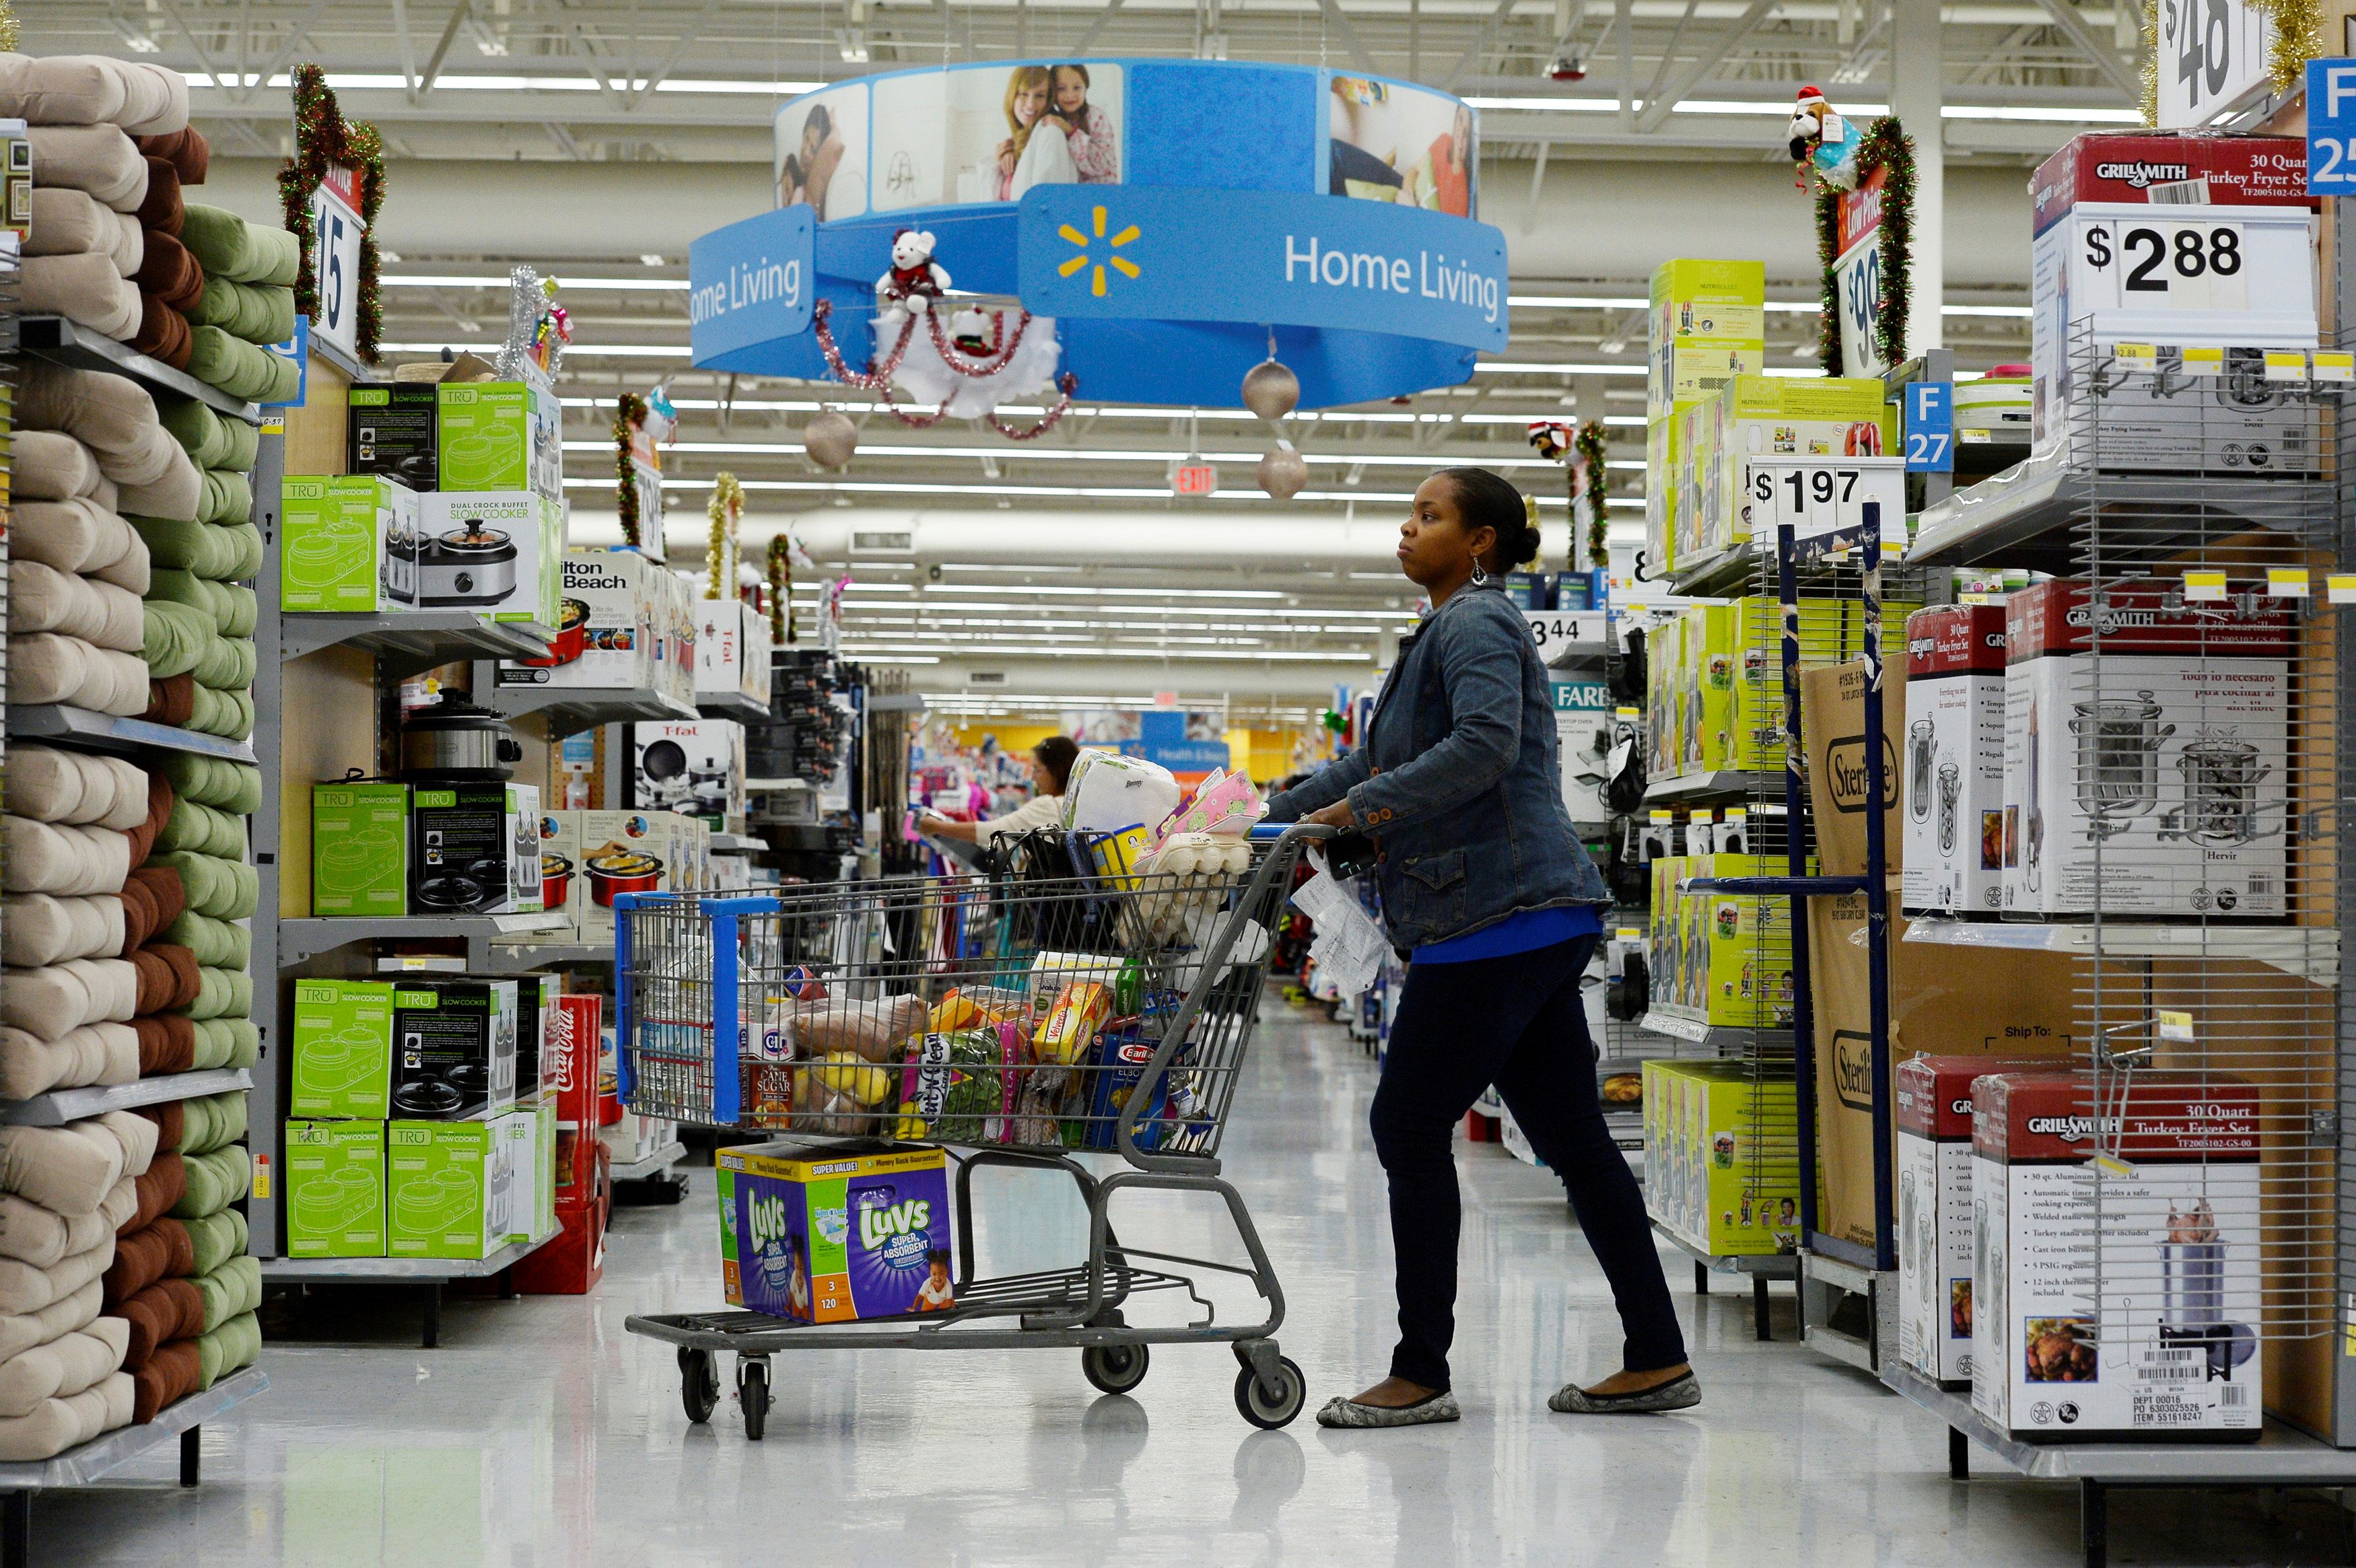 A customer pushes her shopping cart through the aisles at a Walmart store in the Porter Ranch section of Los Angeles